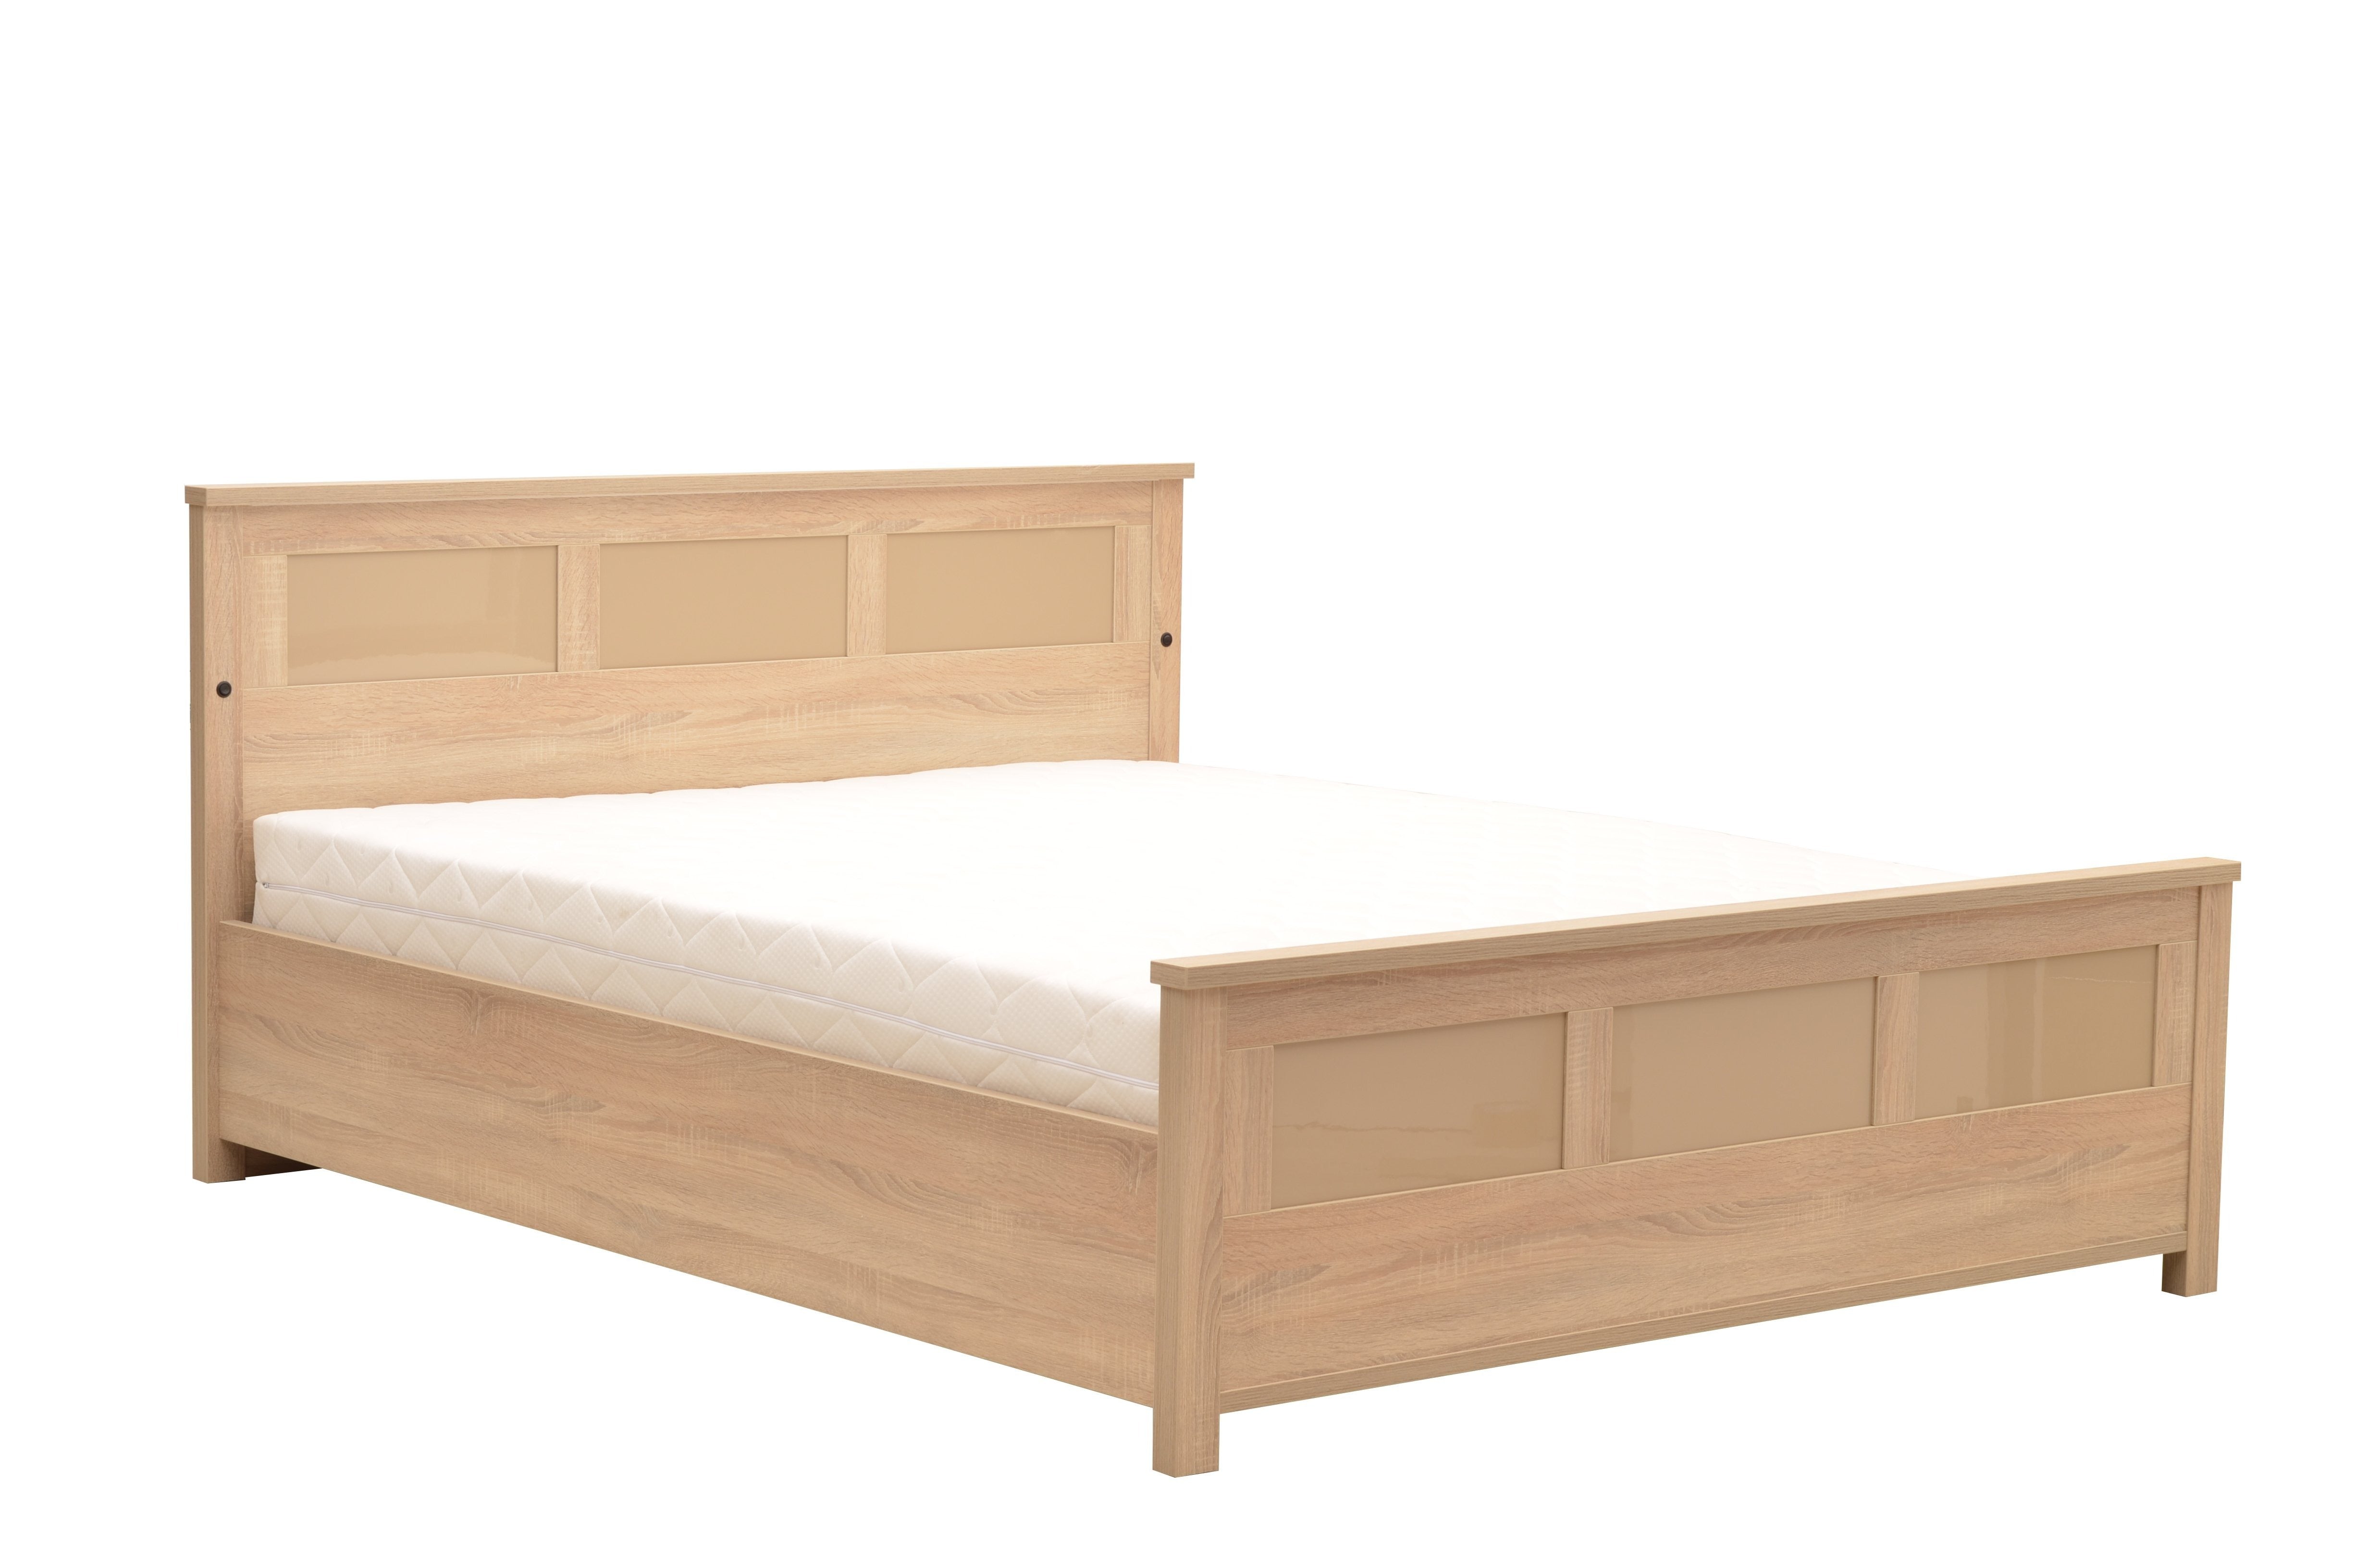 View Cremona Bed with LED in 3 Sizes 160cm Bed information